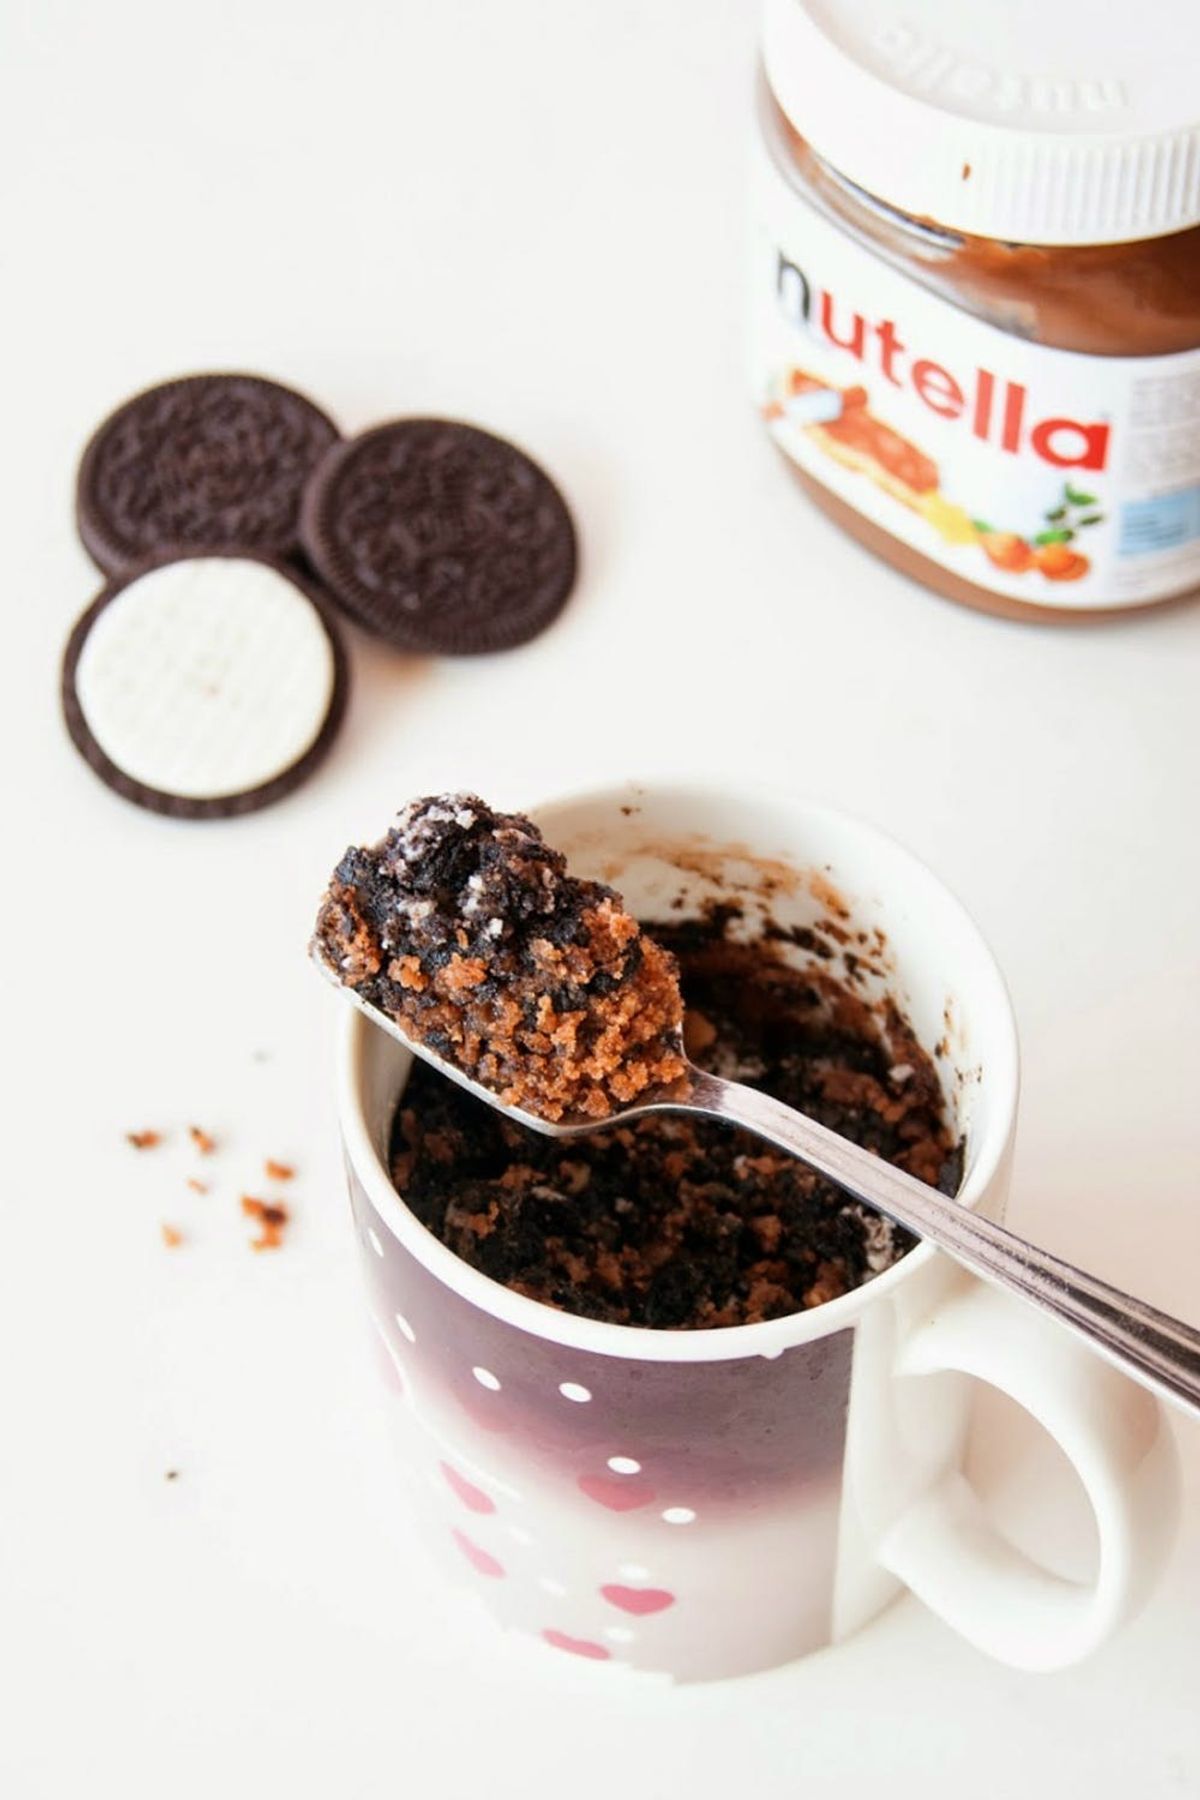 21 Tempting Mug Cakes That Are Way Easy to Make